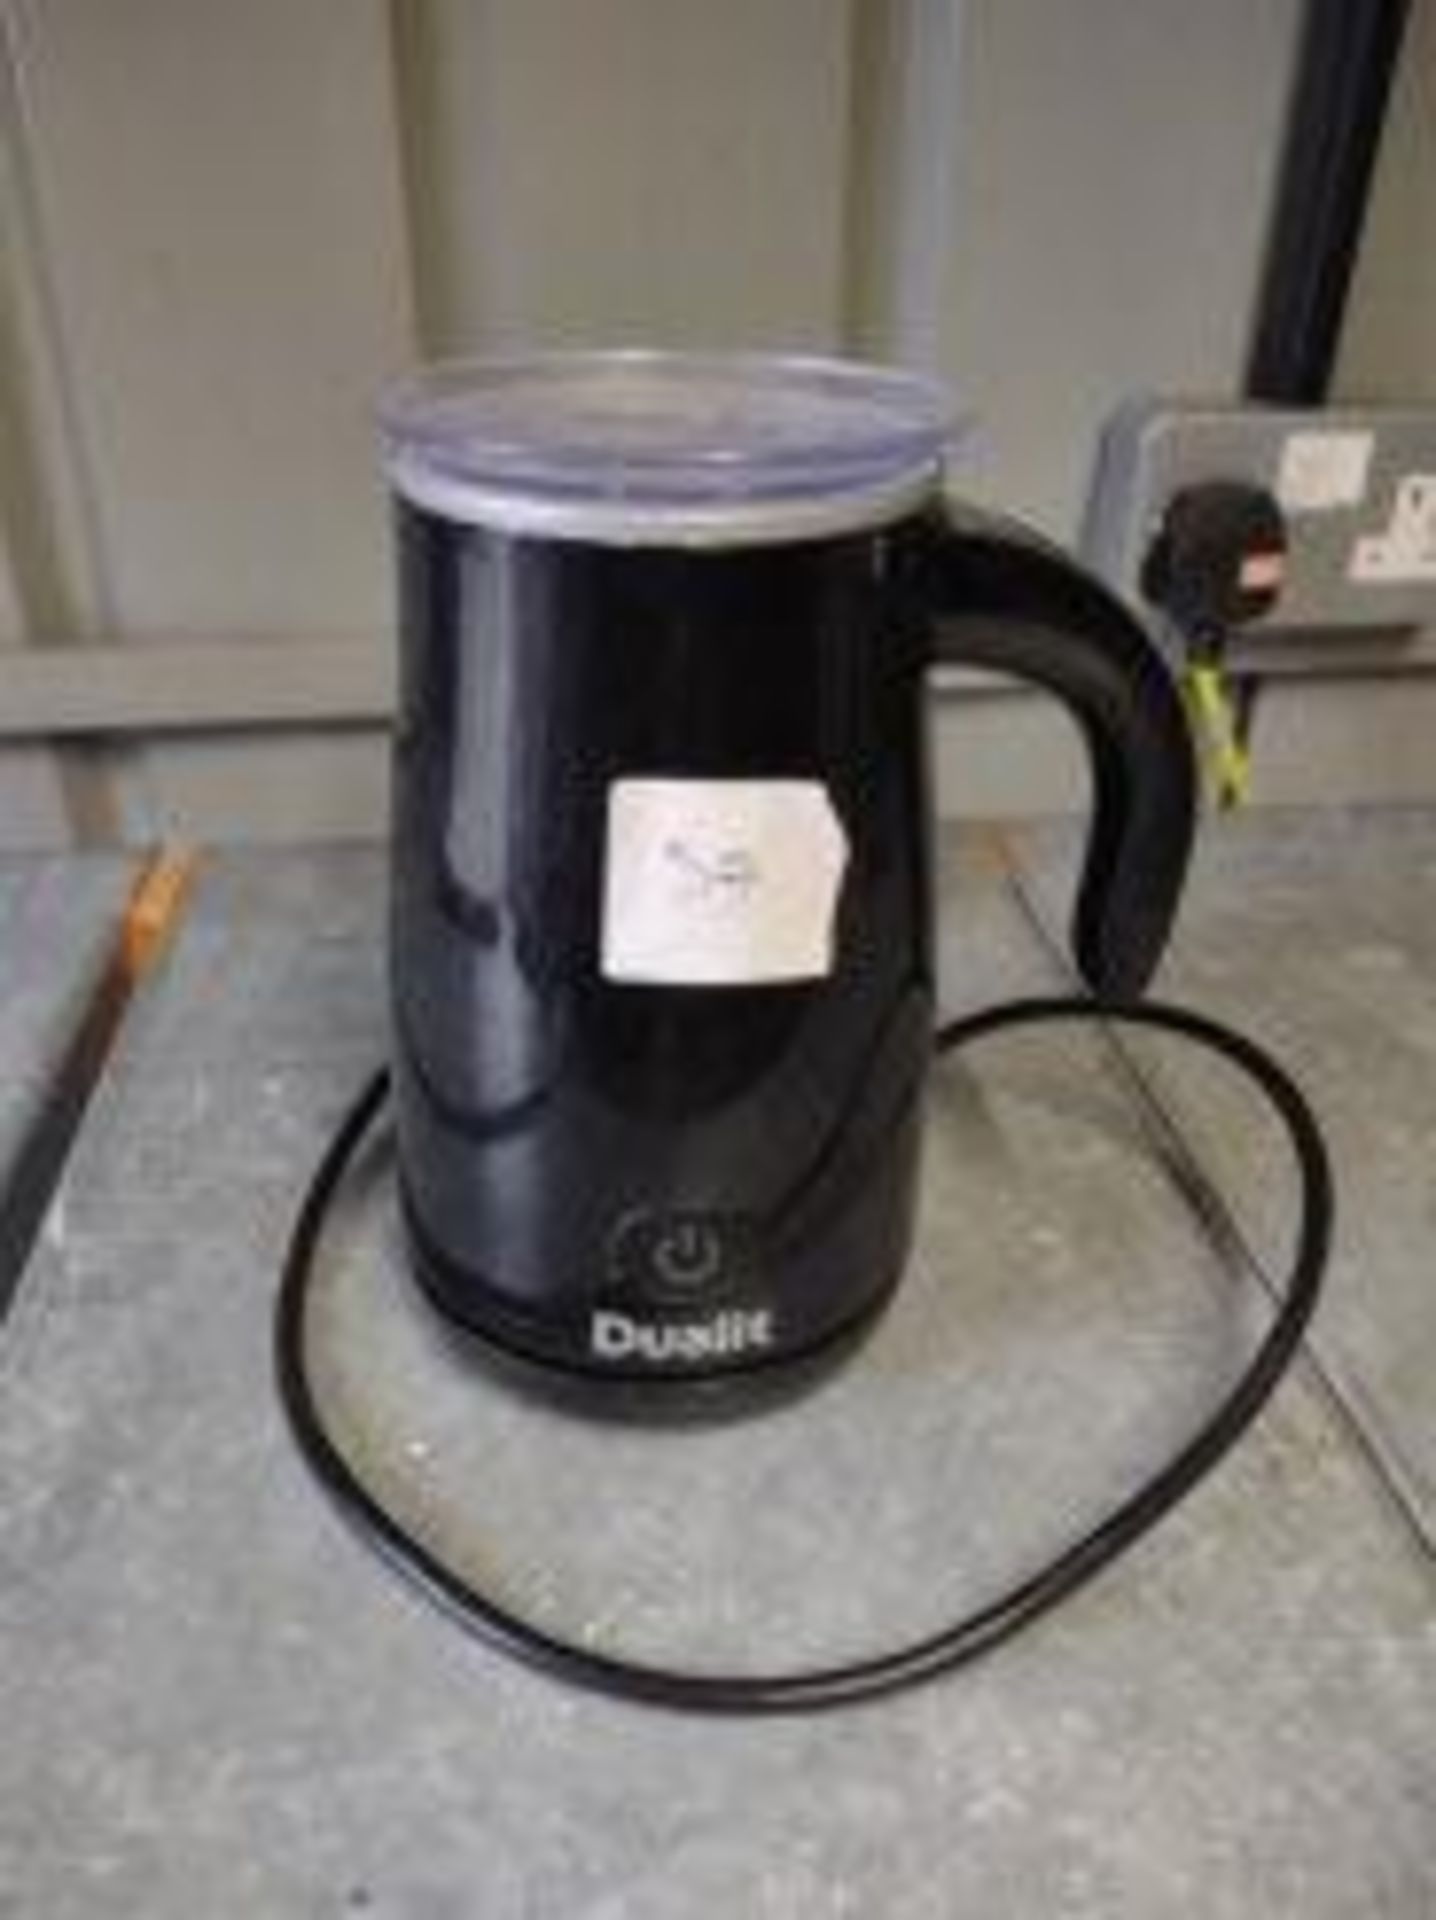 Dualit Milk Frother/Heater – Approx rrp £39.99